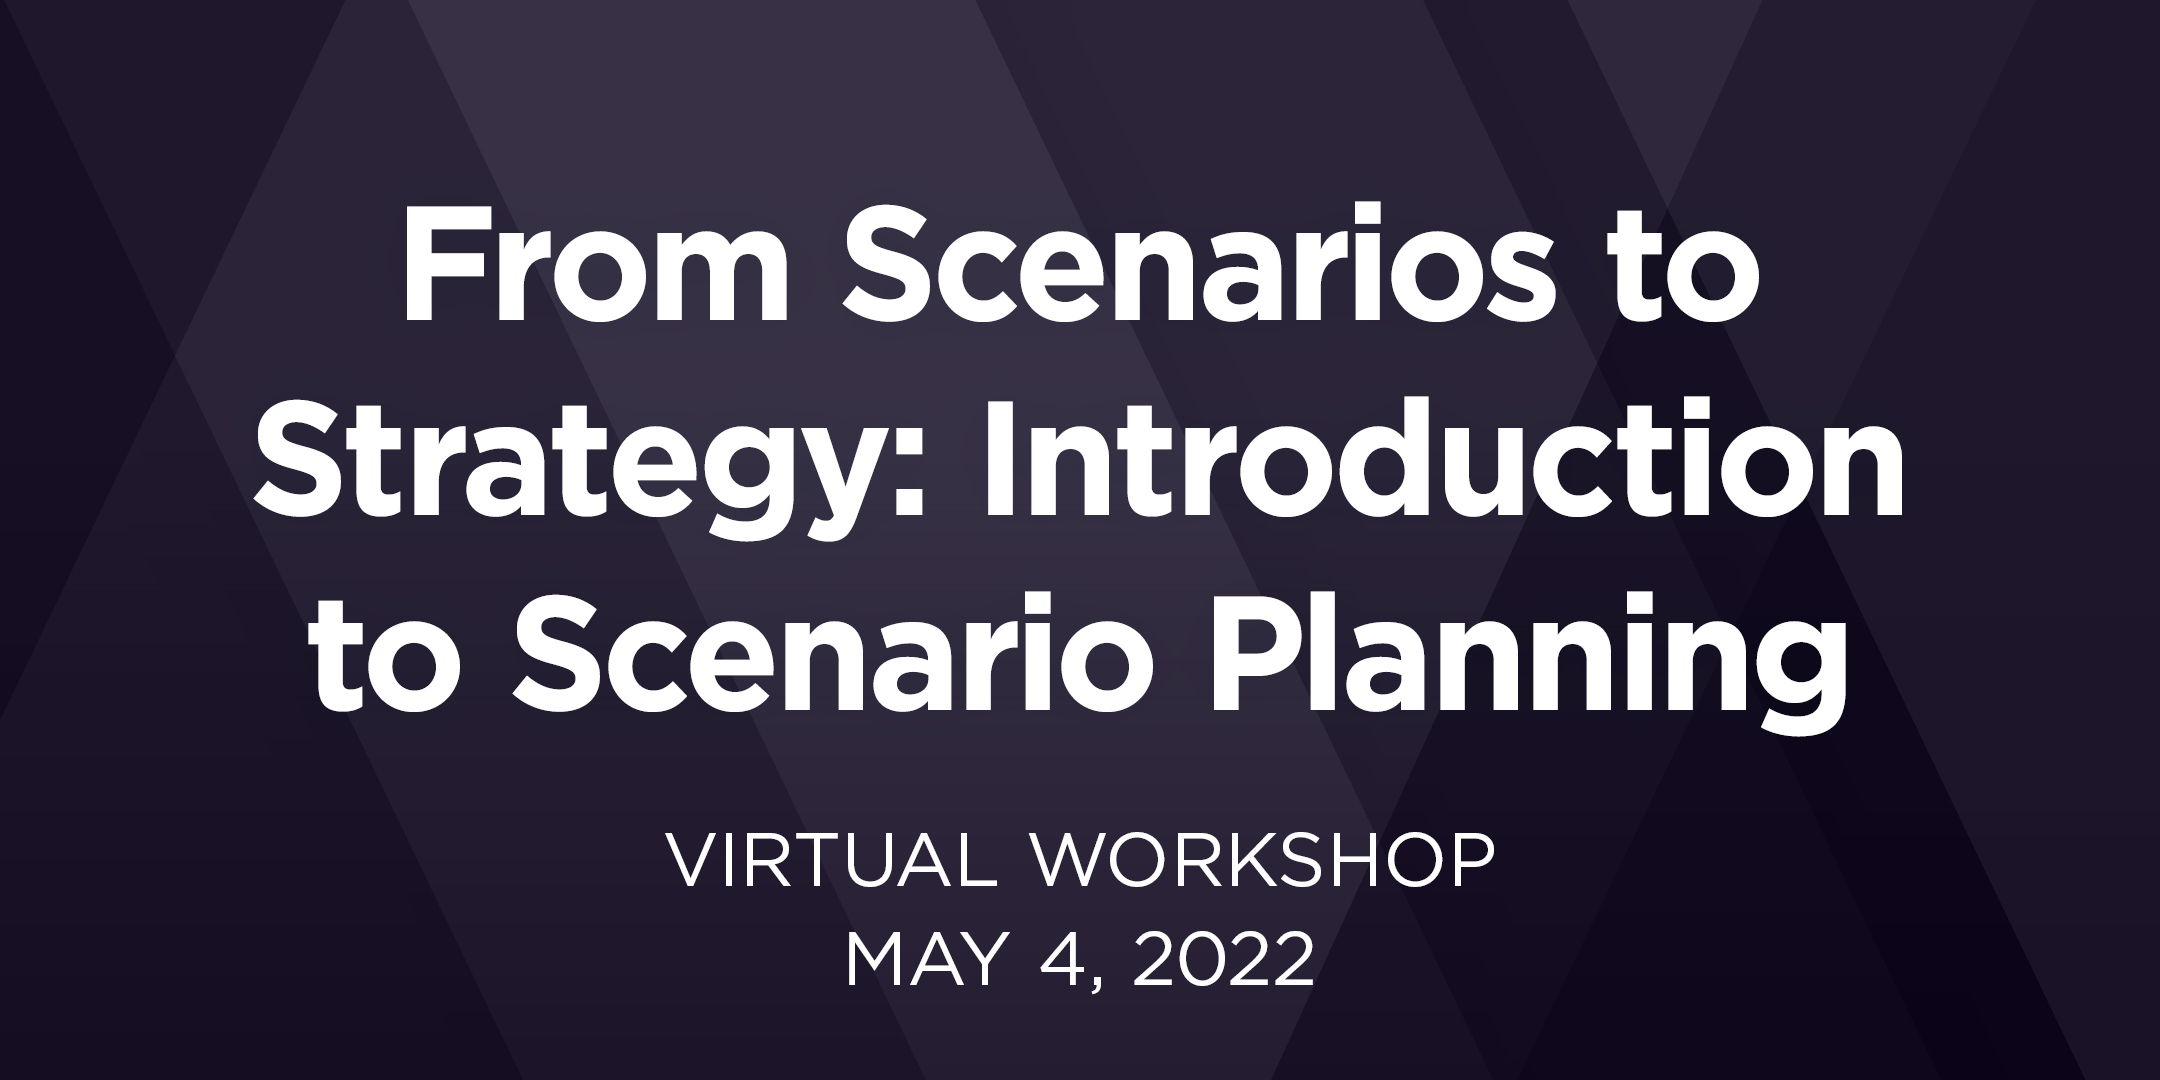 From Scenarios to Strategy: An Introduction to Scenario Planning